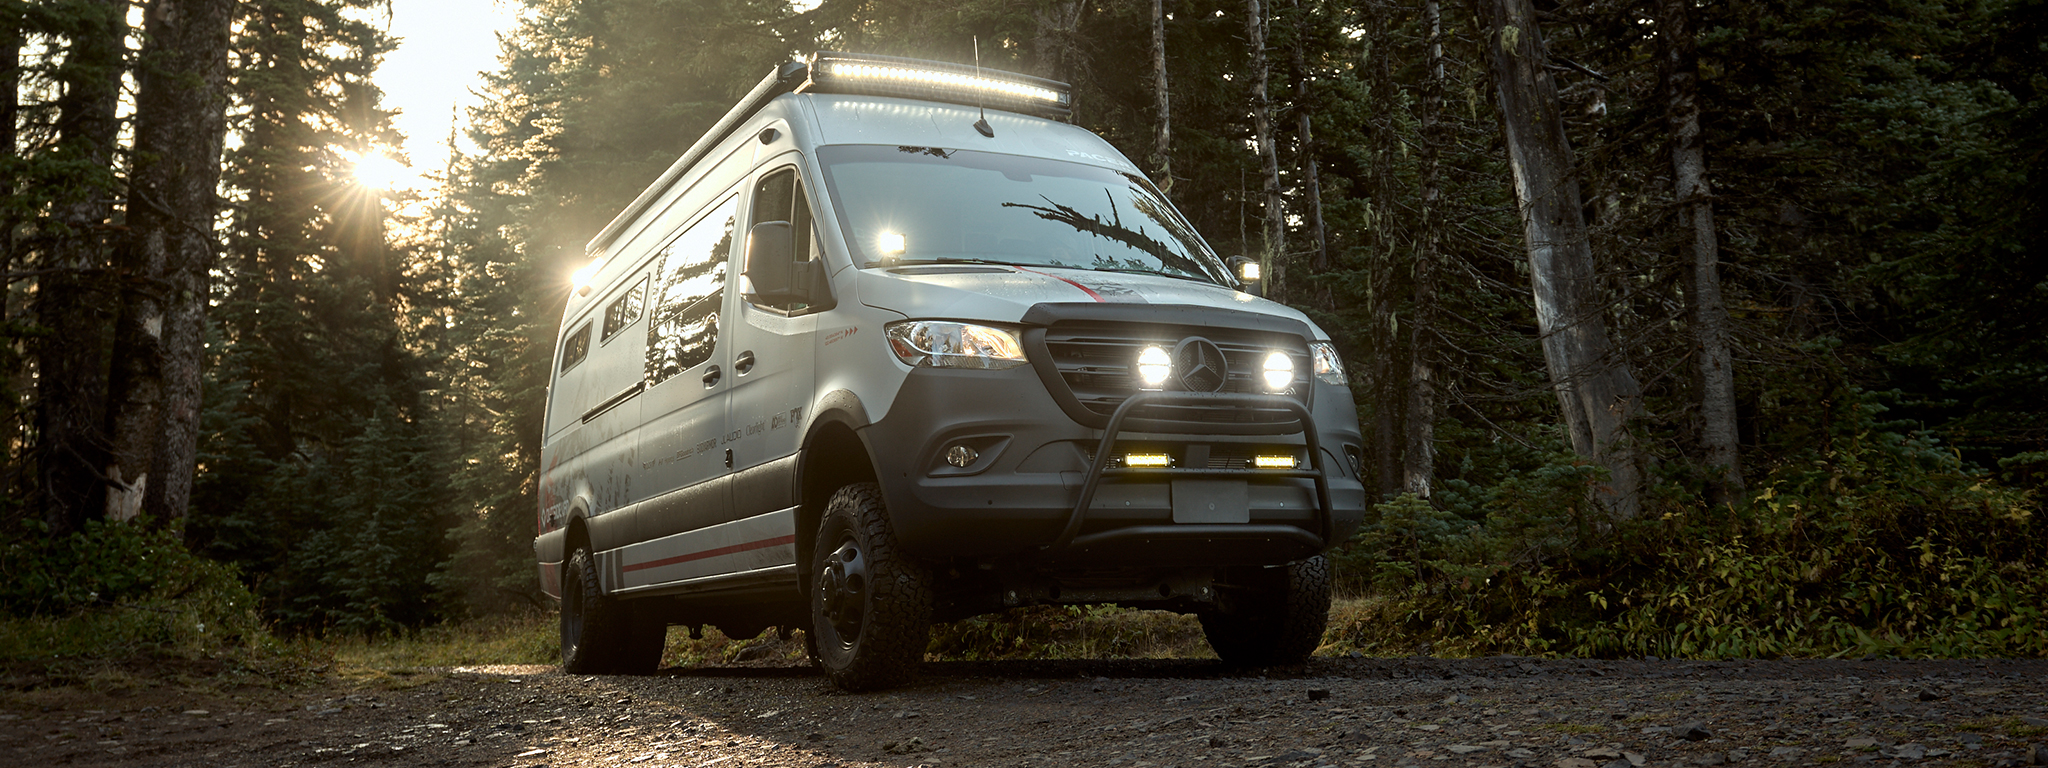 Pacer is a custom off road ready sprinter designed by outside van for trail running and ultramarathons